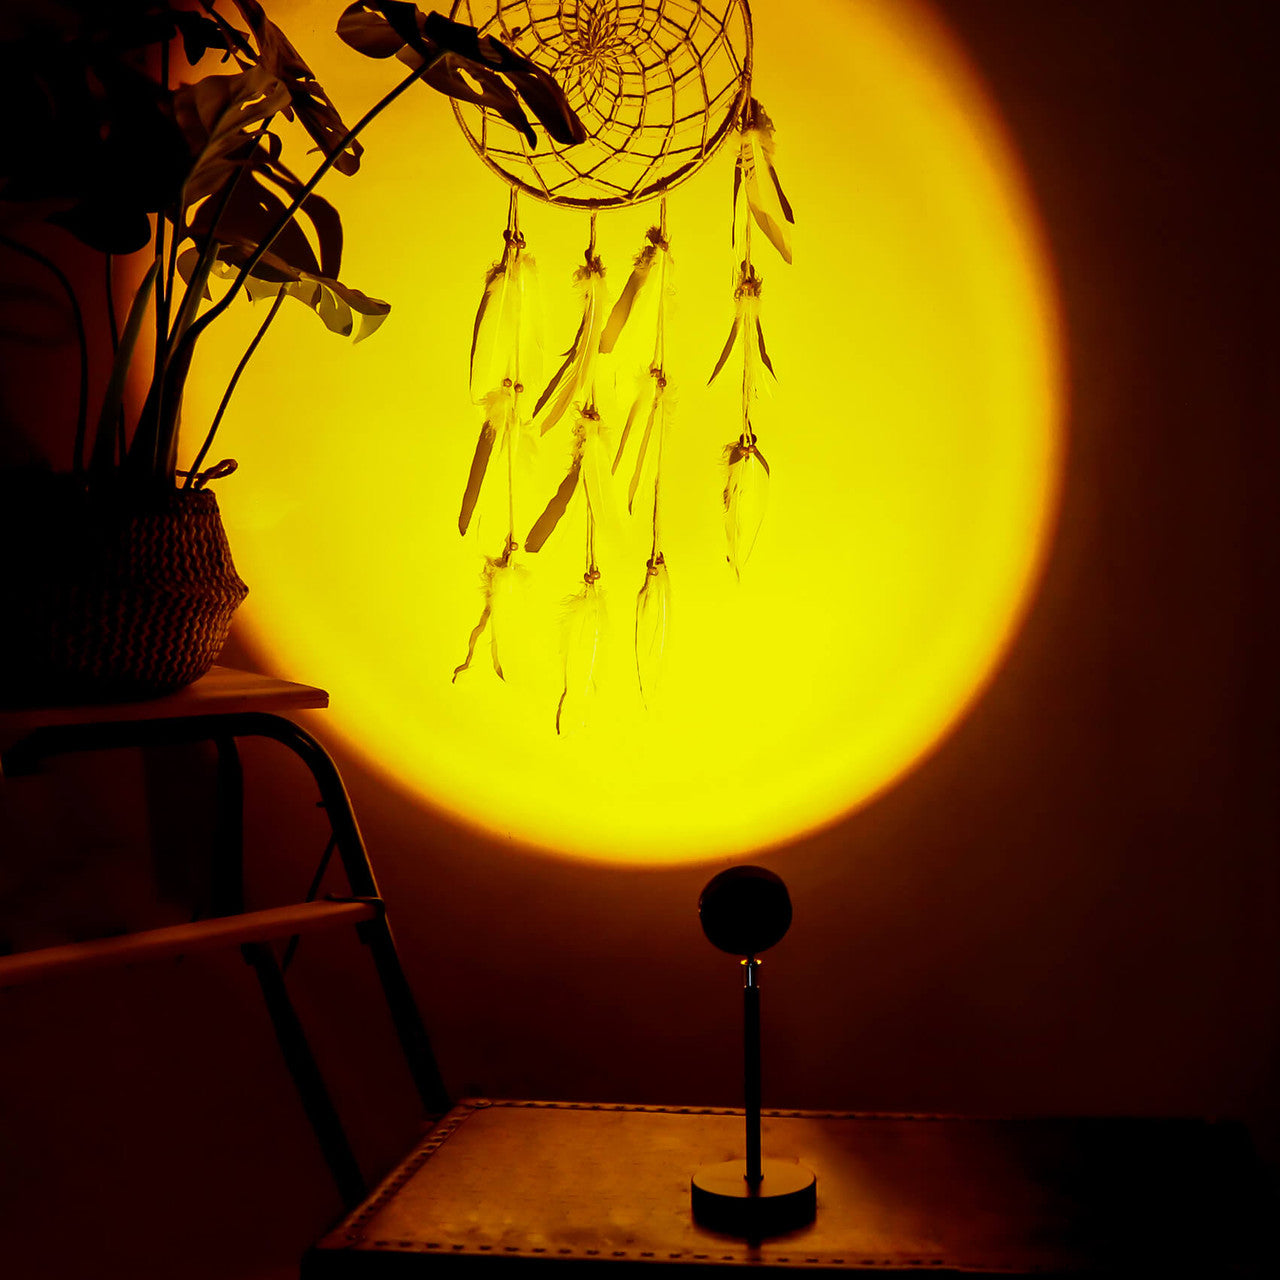 Sunset Lamp Projection Light - Buyrouth